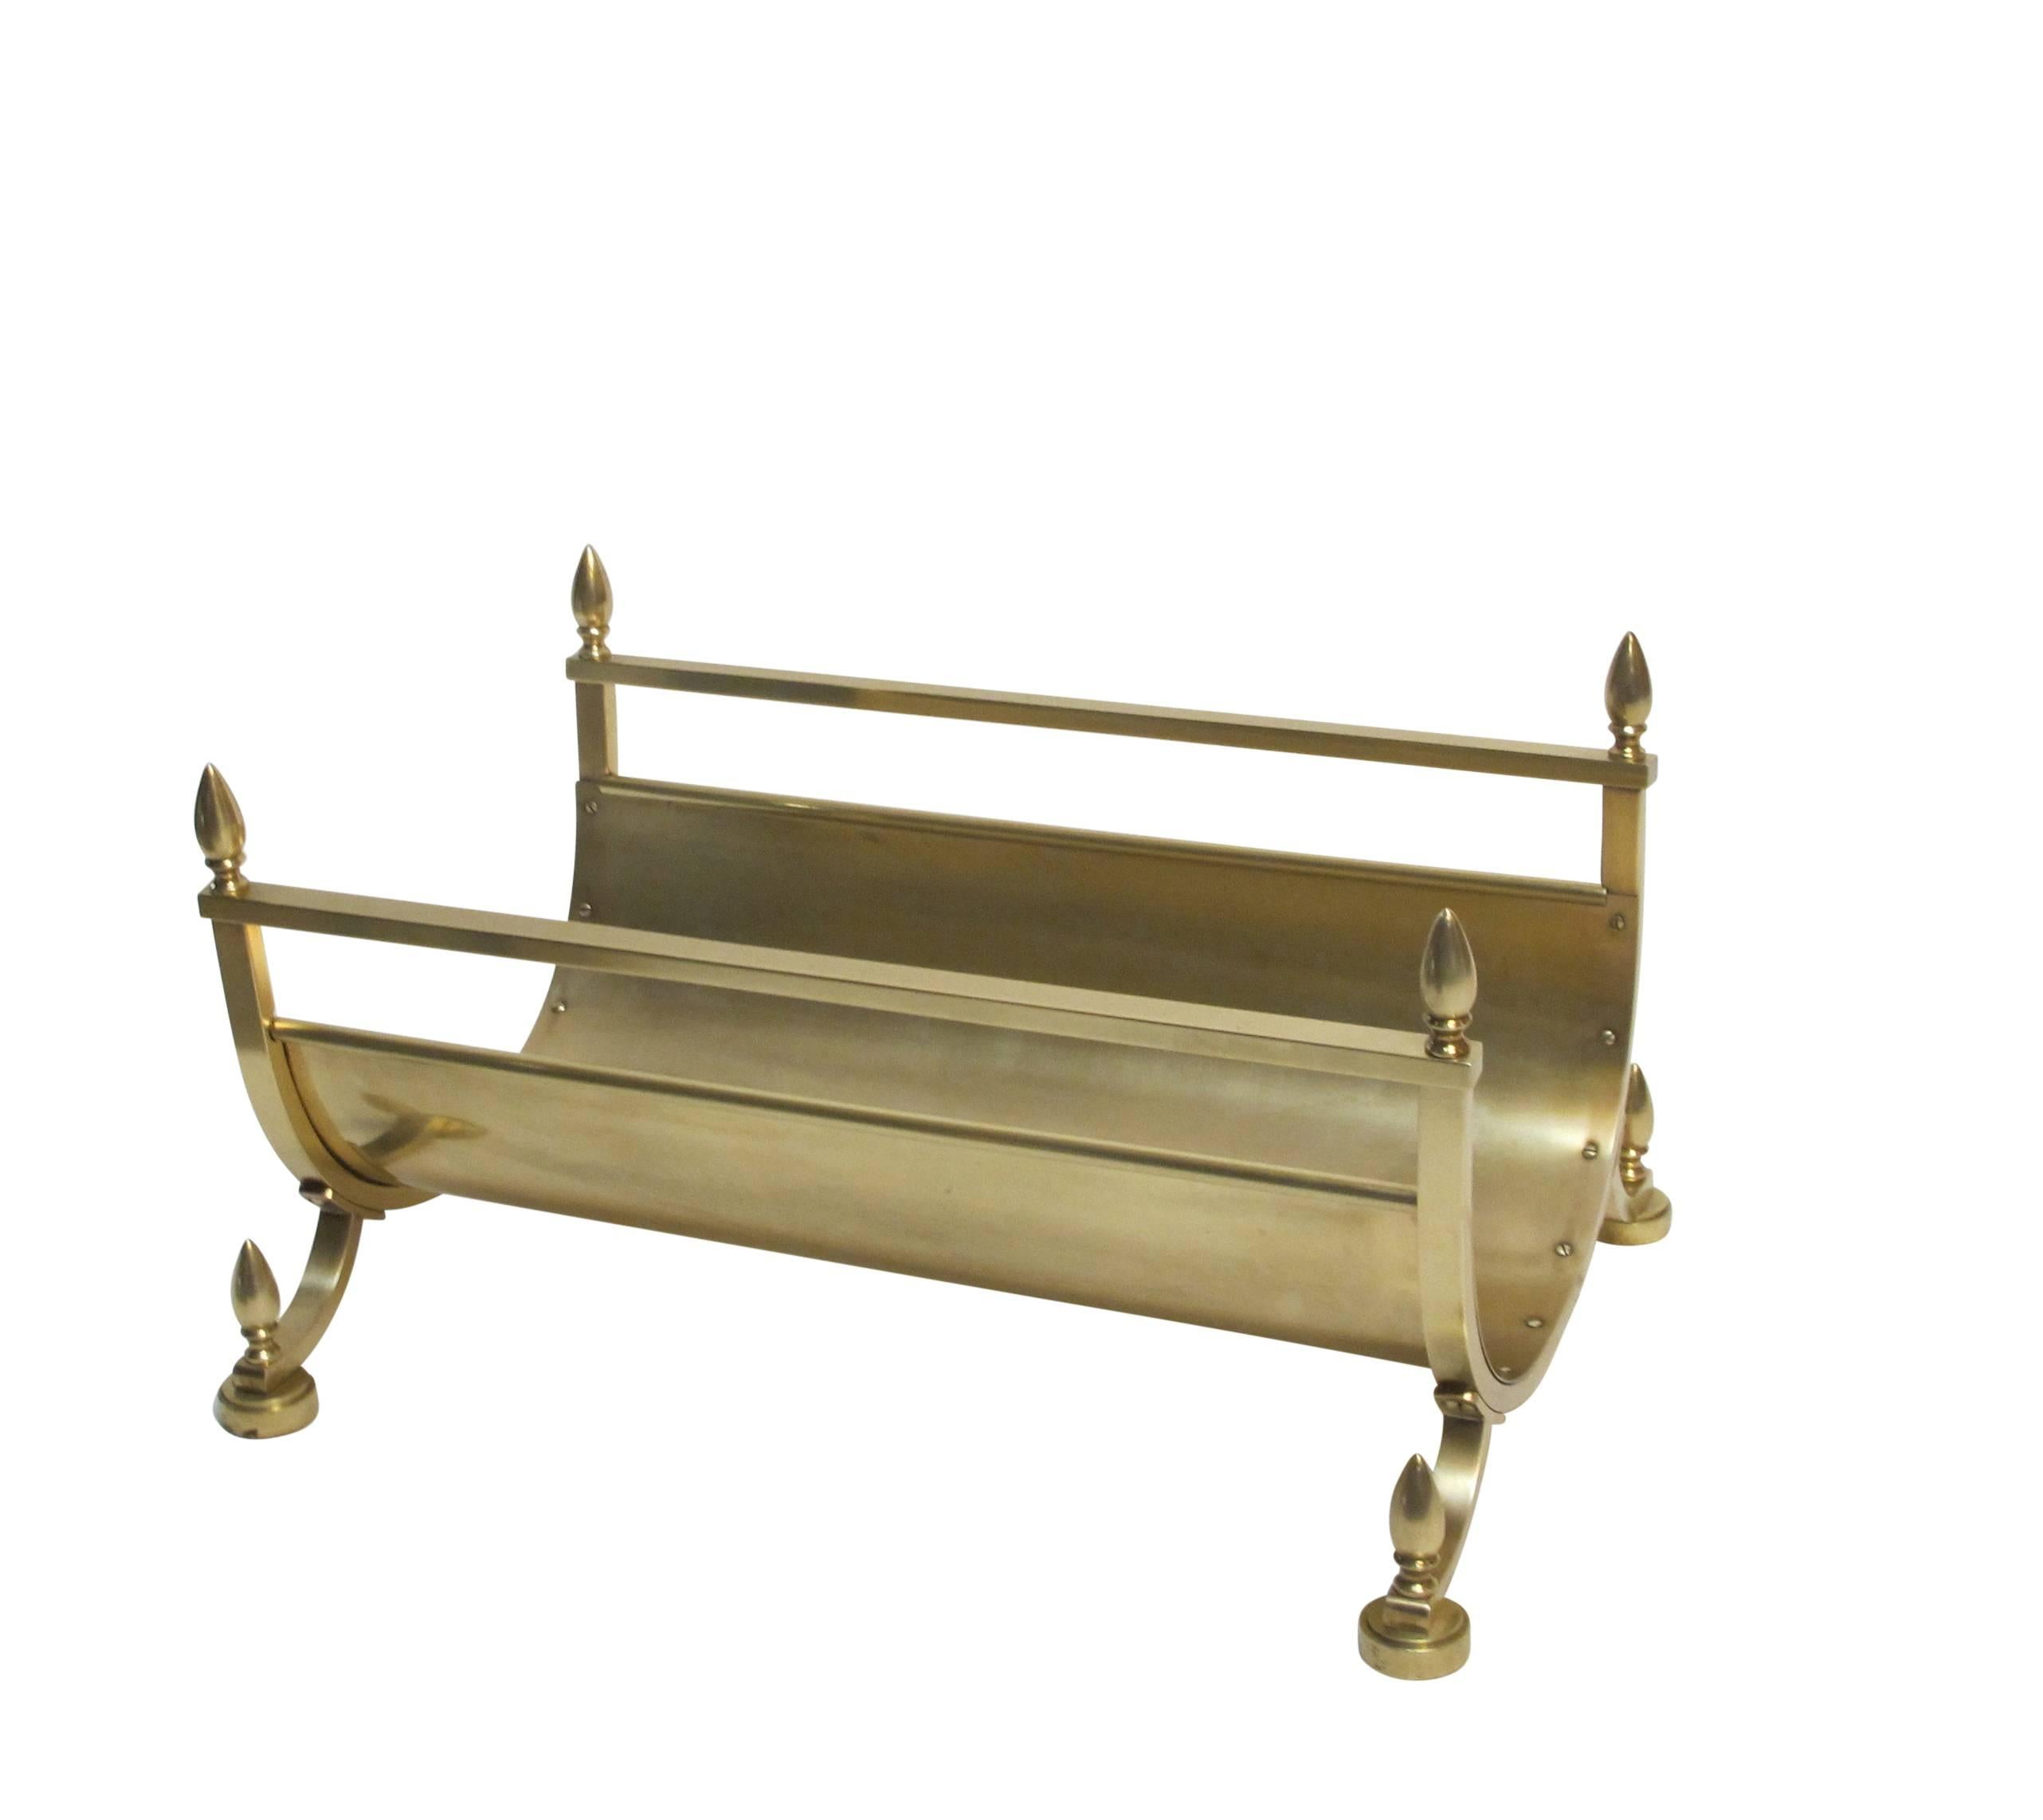 For the fireplace, a brass log holder (can be used for magazines as well) in the neoclassical style with urn shape finials, American, mid-20th century.
Recently polished and re-lacquered.